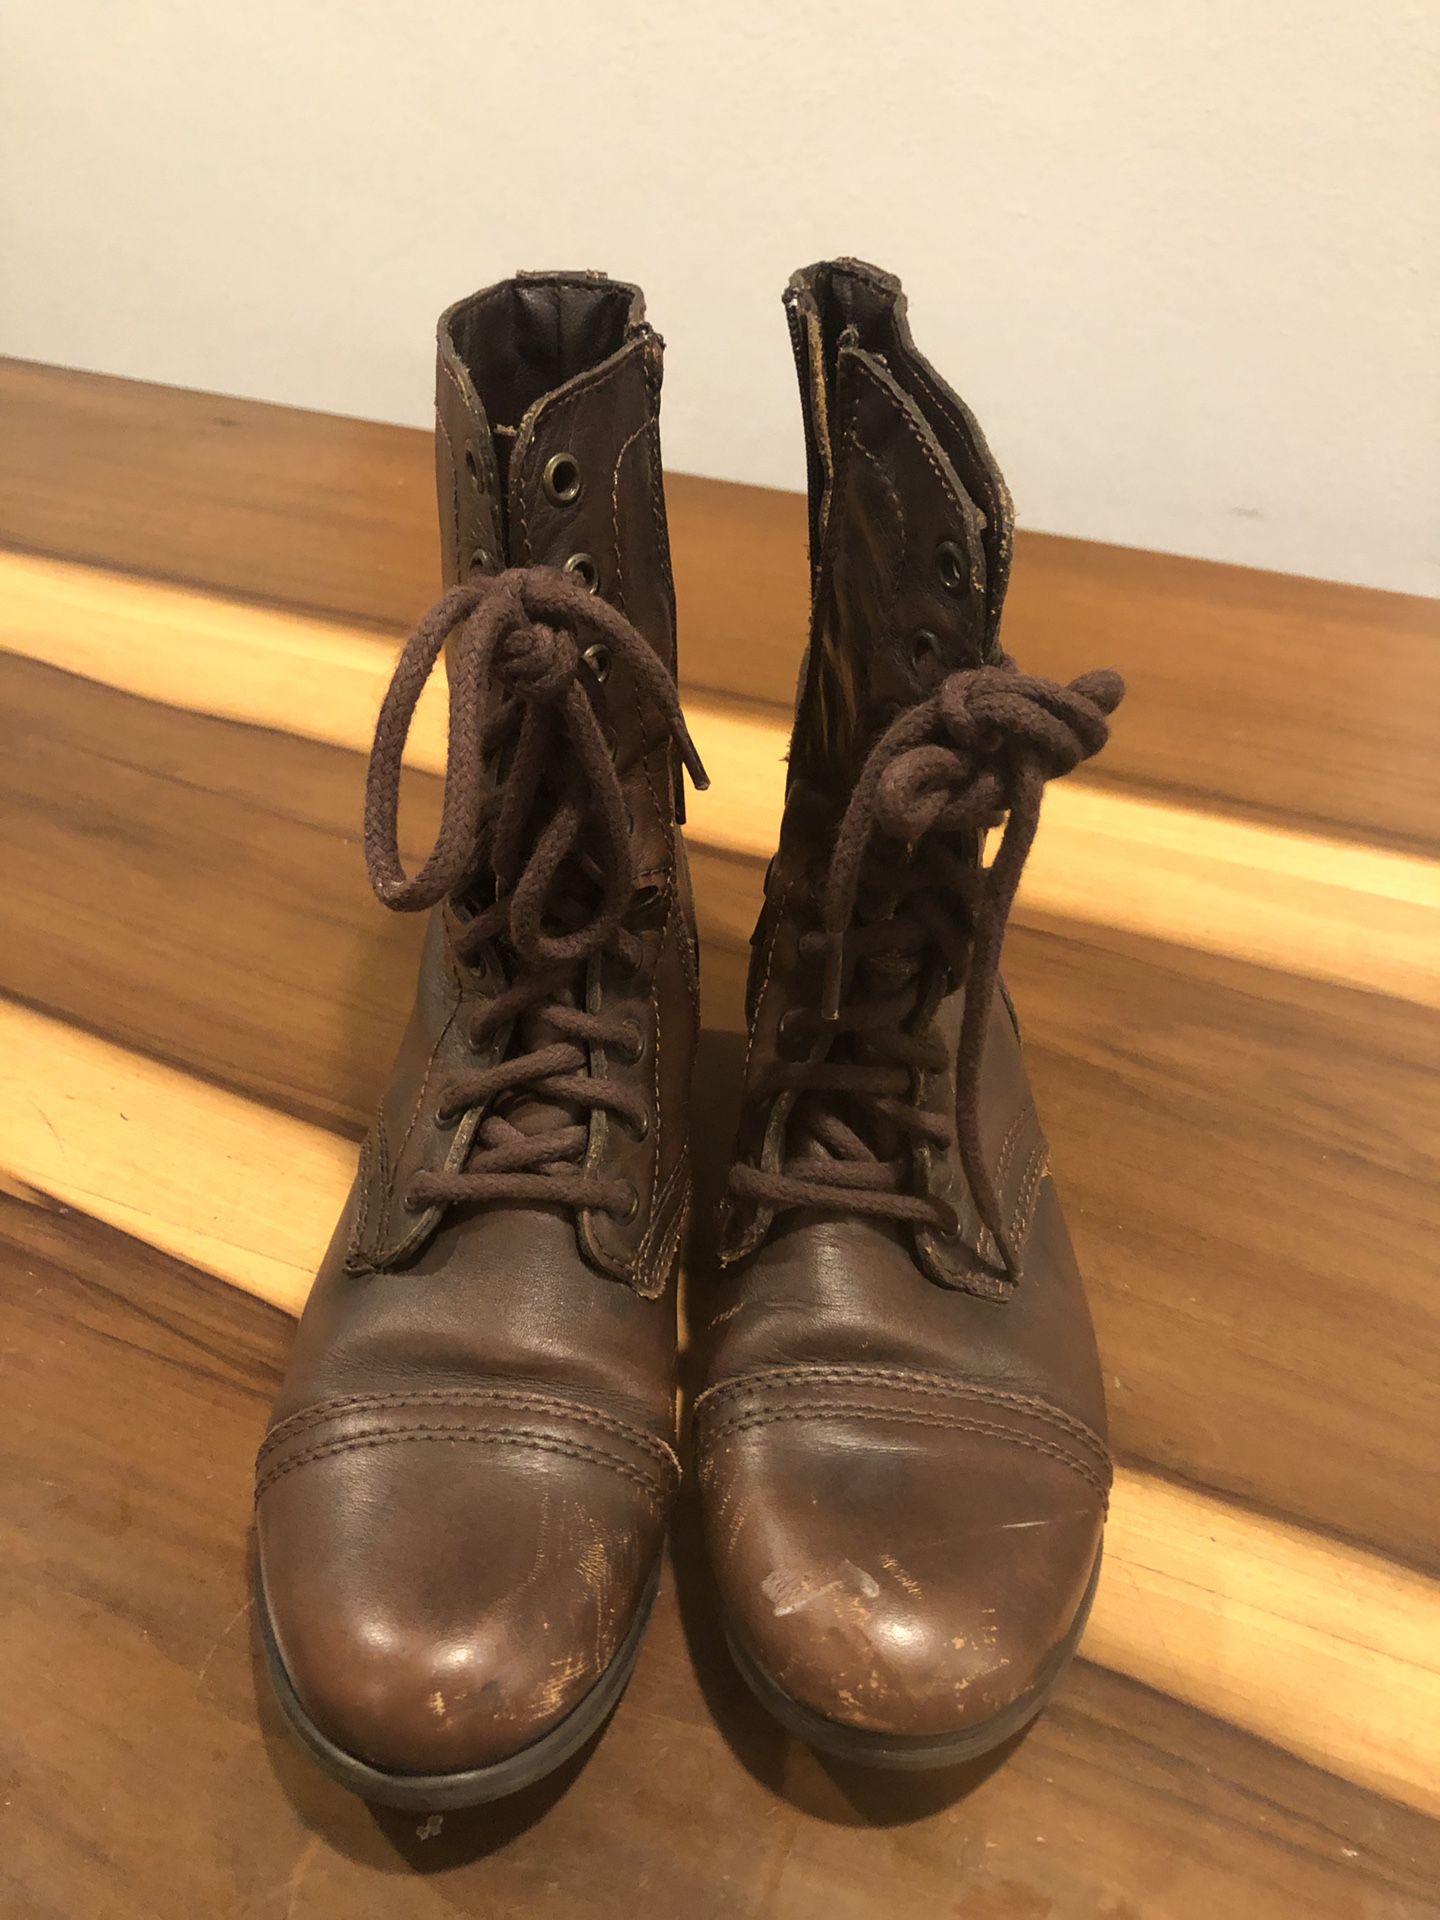 Steve Madden brown leather boots size 8